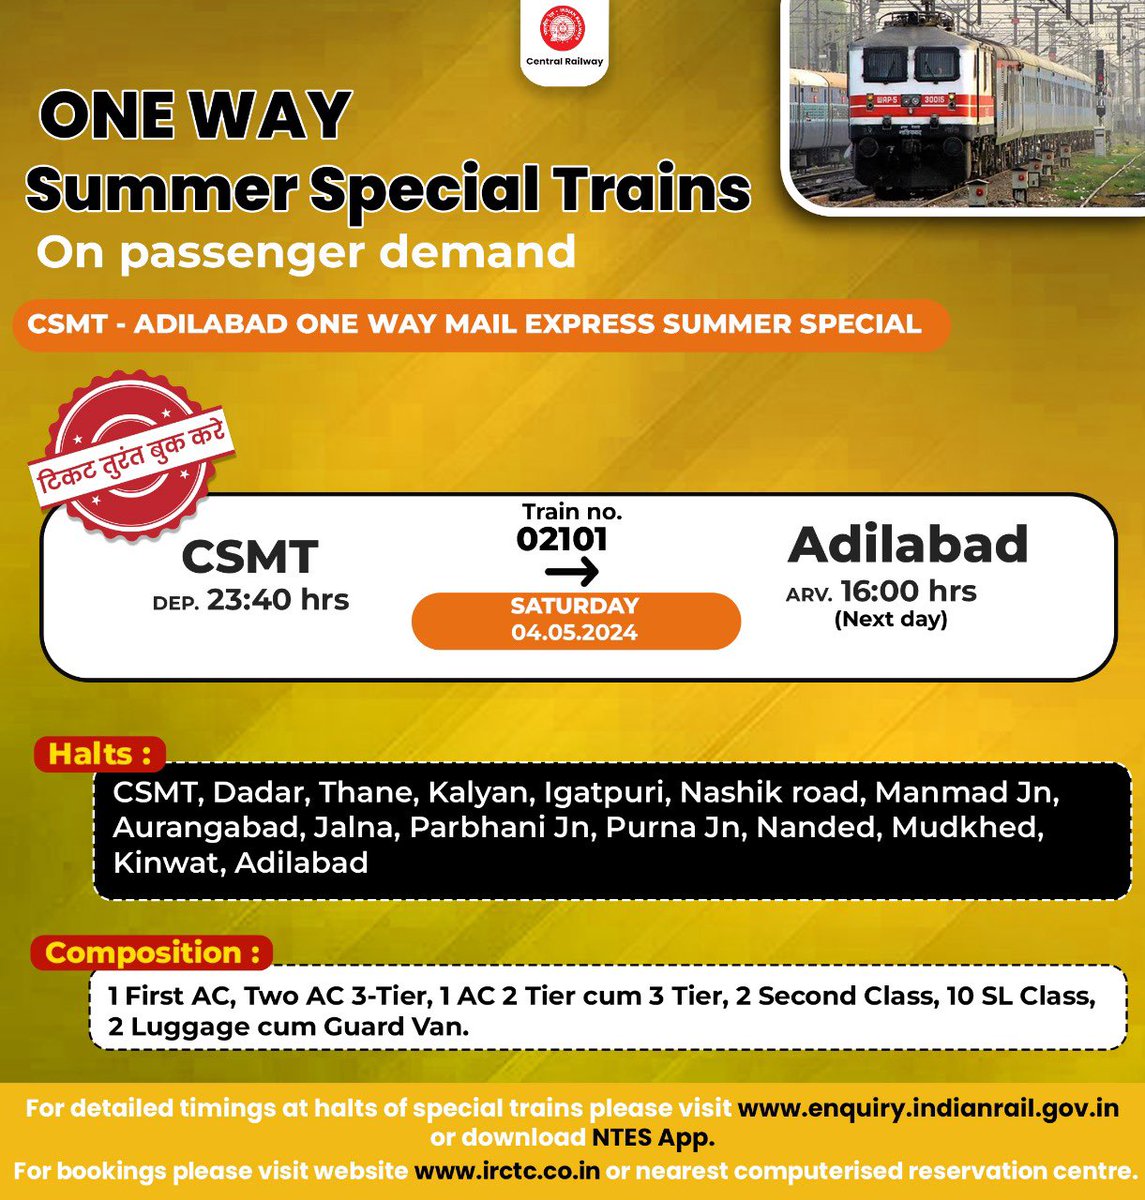 CSMT to Adilabad!!

Escape the summer heat with Central Railway's CSMT - Adilabad One Way Mail Express! Book your tickets now for a cool getaway! 

#CentralRailway #SummerSpecial #CSMTtoAdilabad 🚆